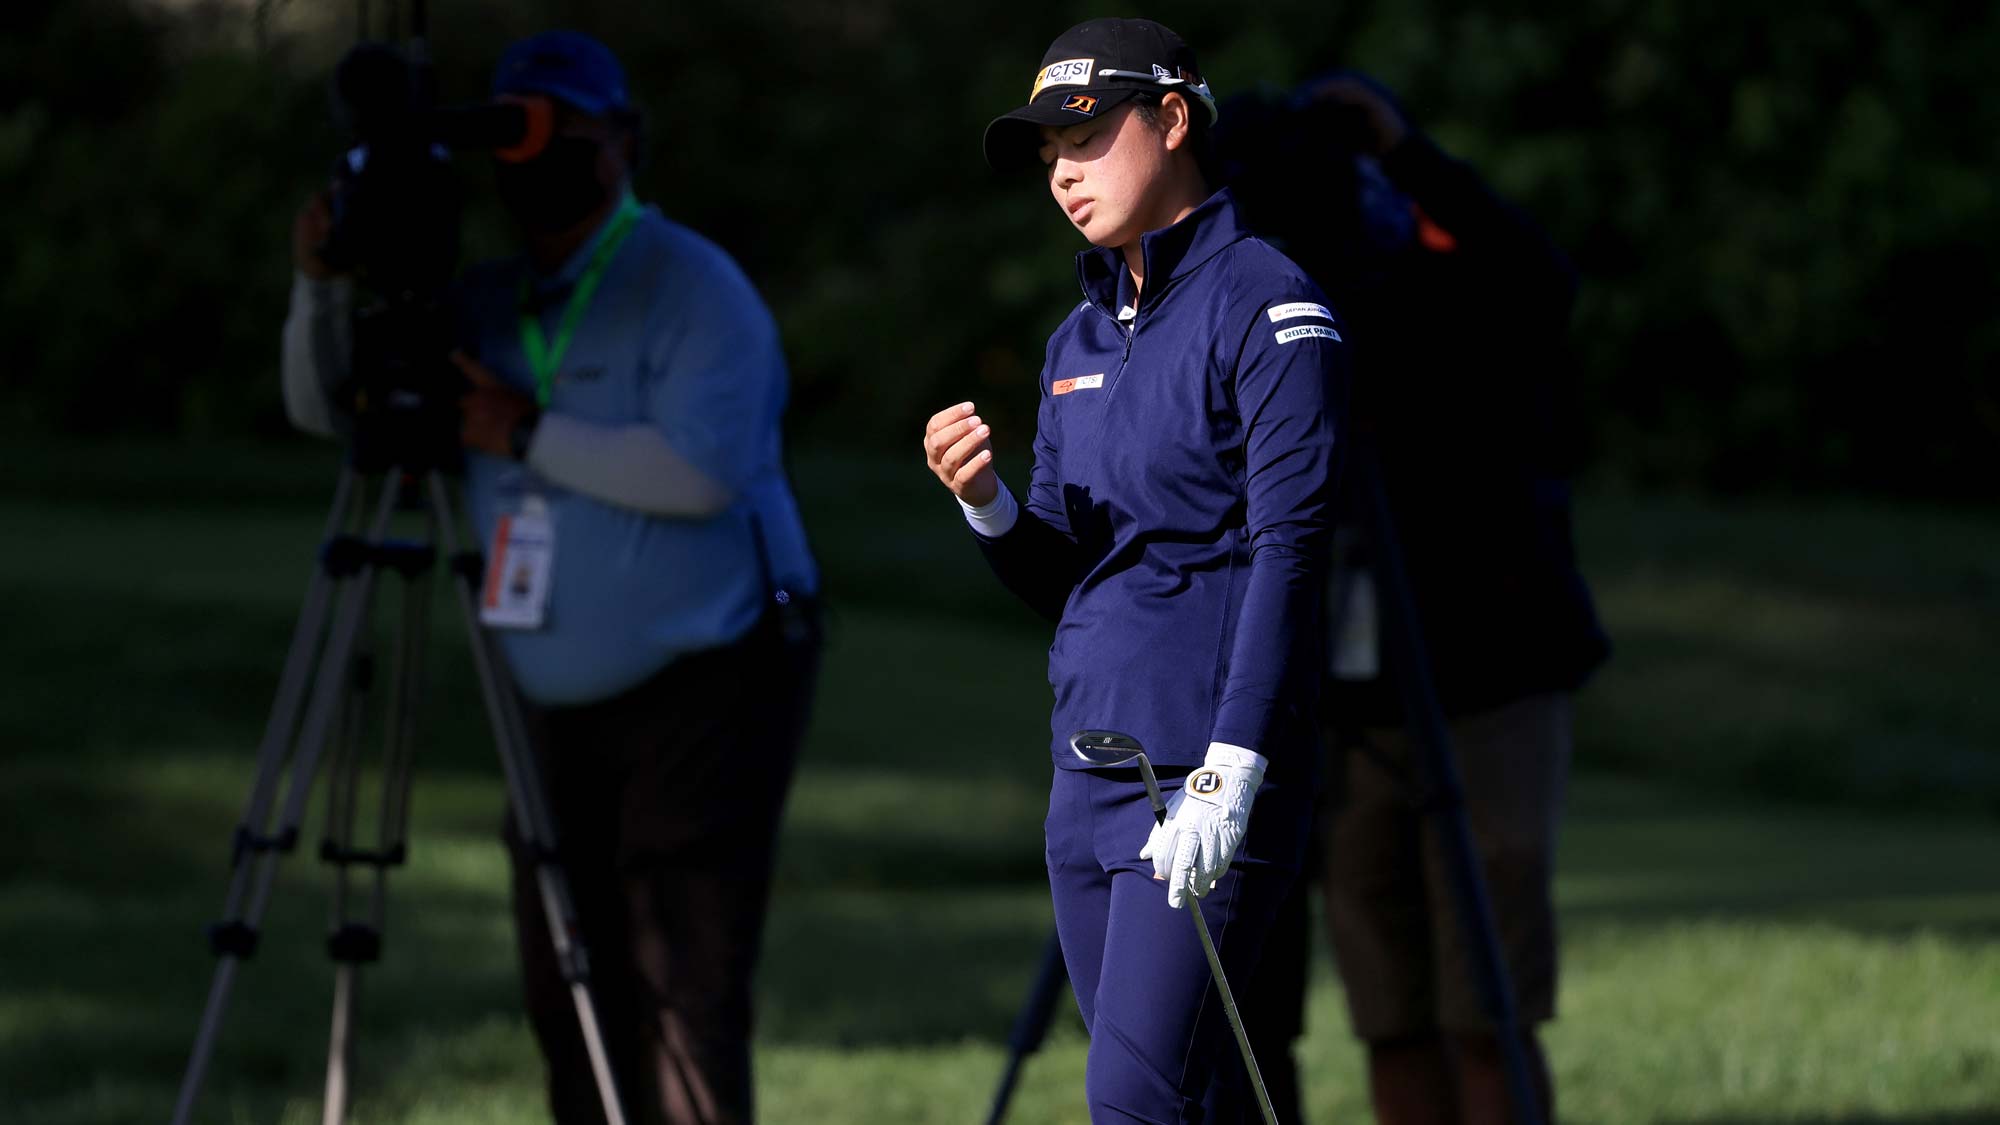 Yuka Saso of the Philippines reacts to a chip shot on the 14th hole green during the third round of the 76th U.S. Women's Open Championship 